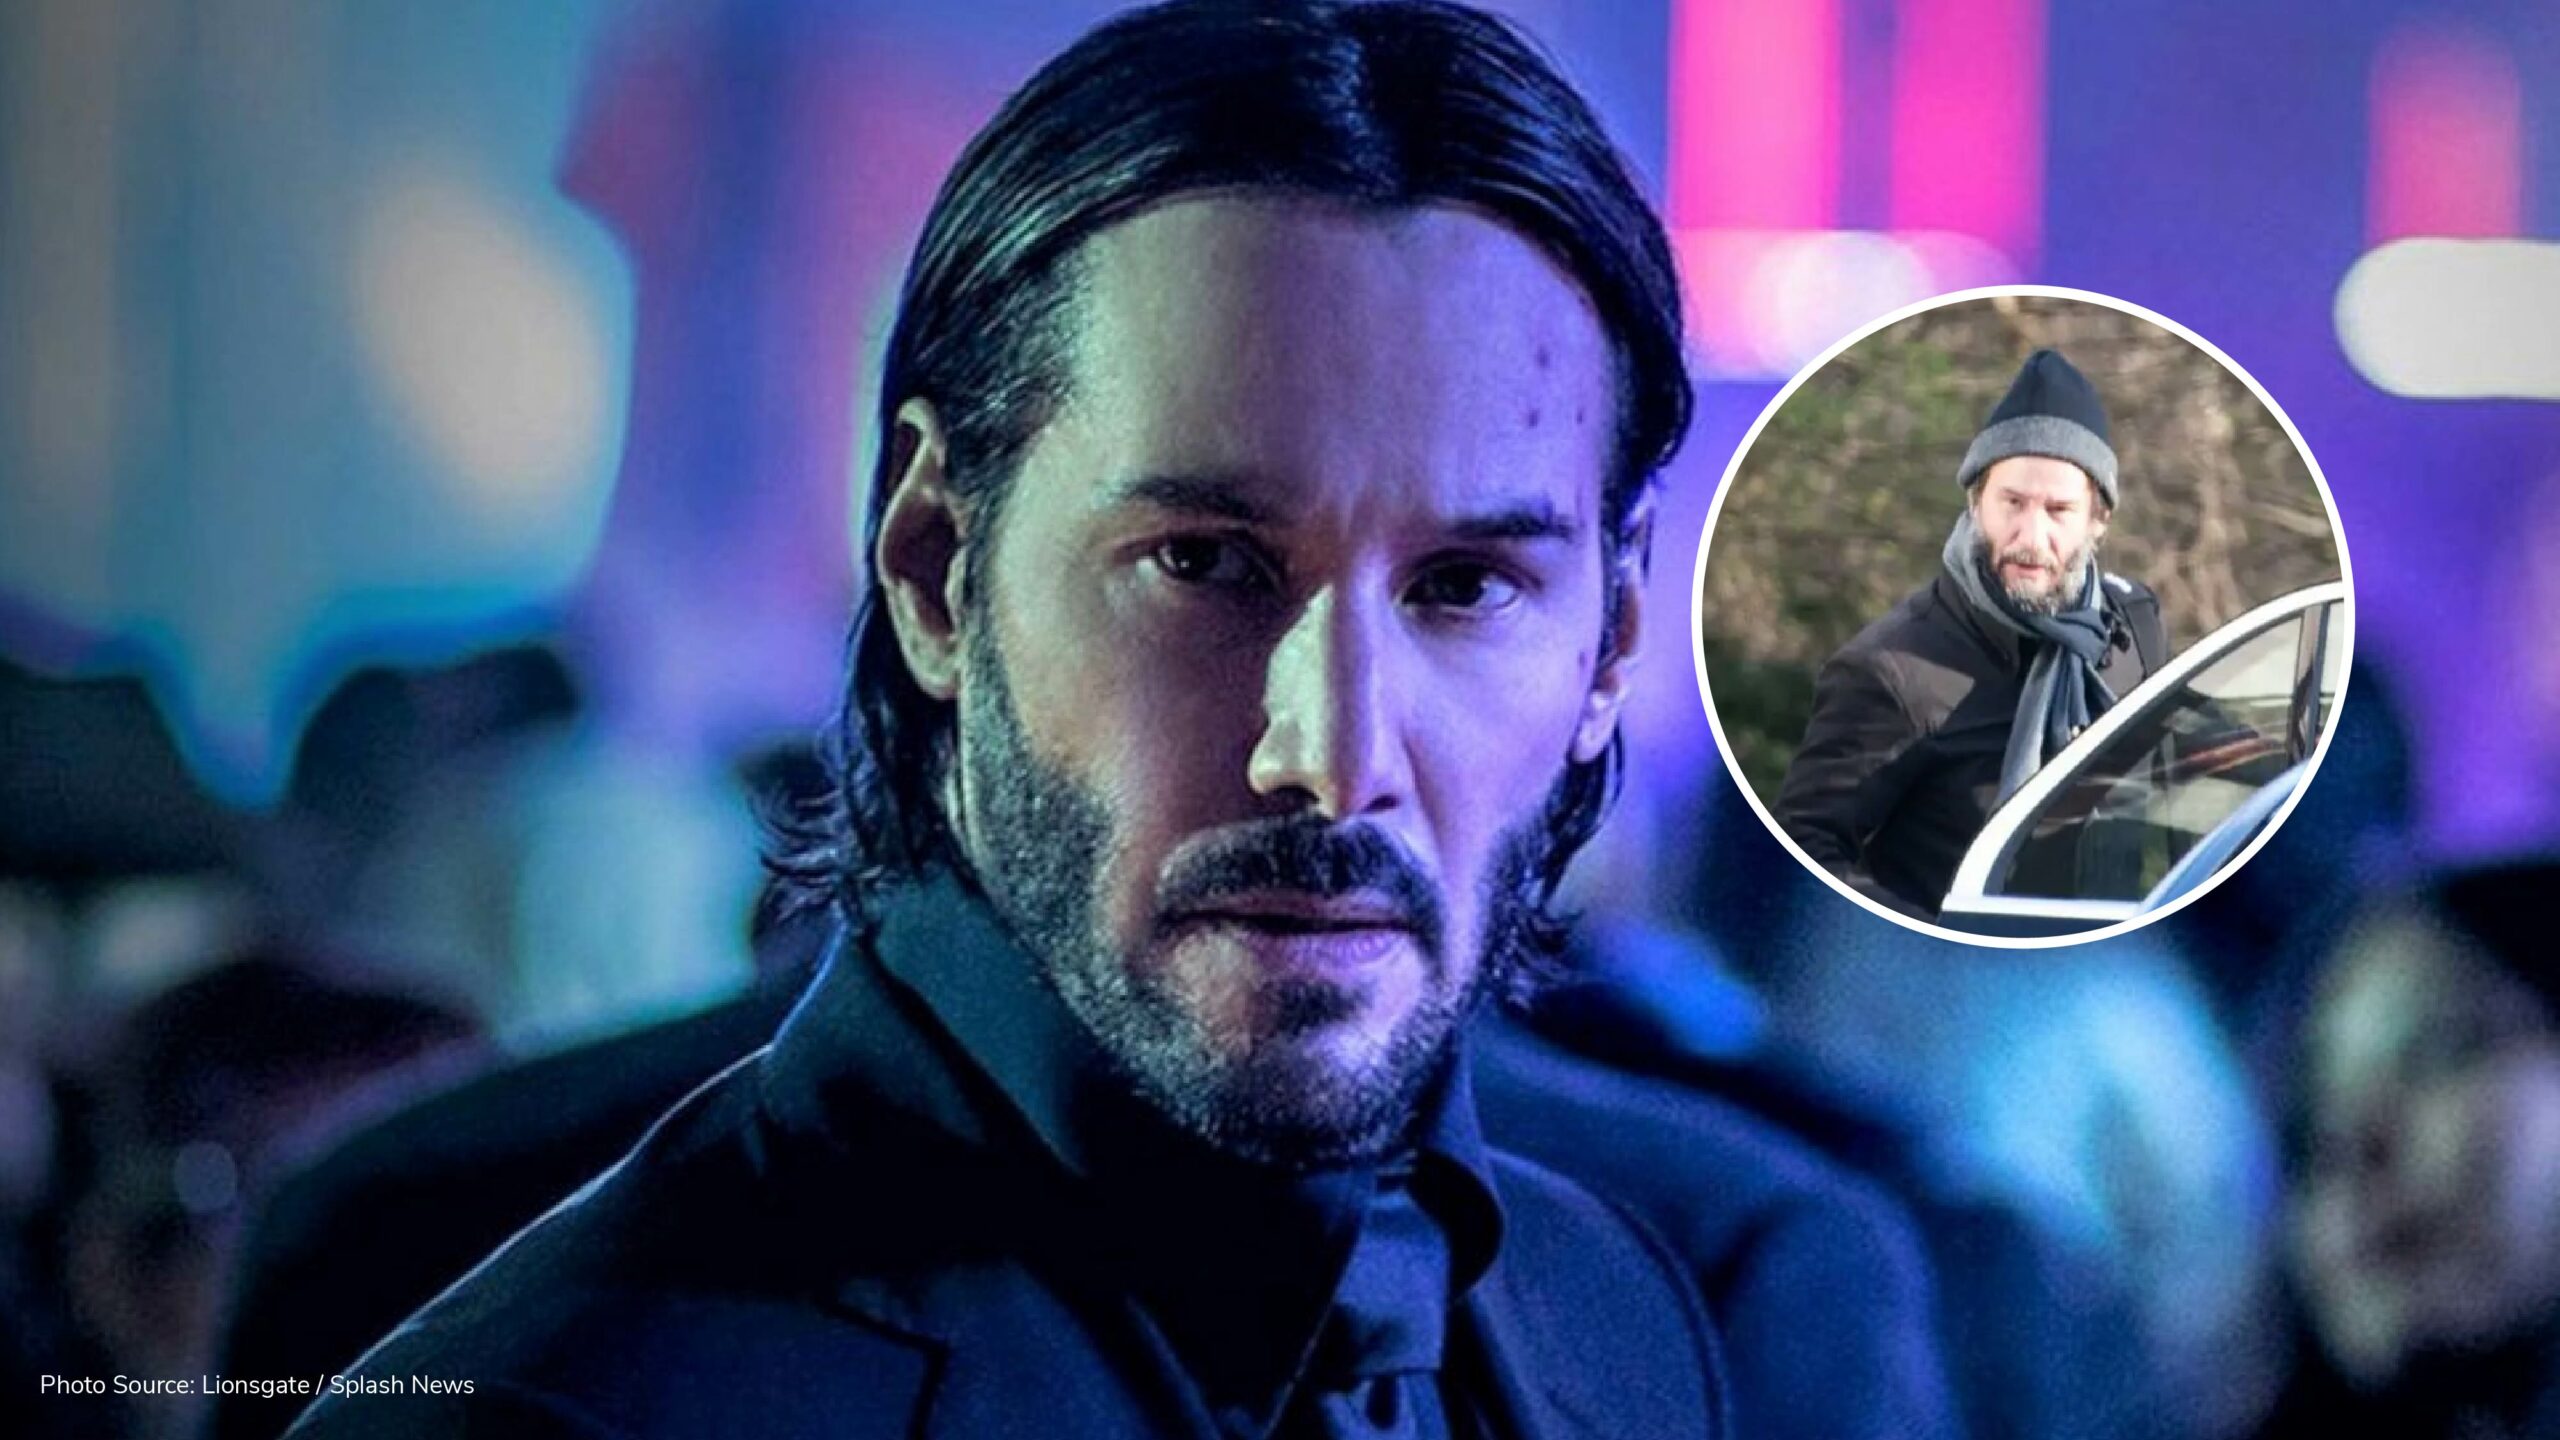 Keanu Reeves spotted on set of John Wick 4 as film set to start filming